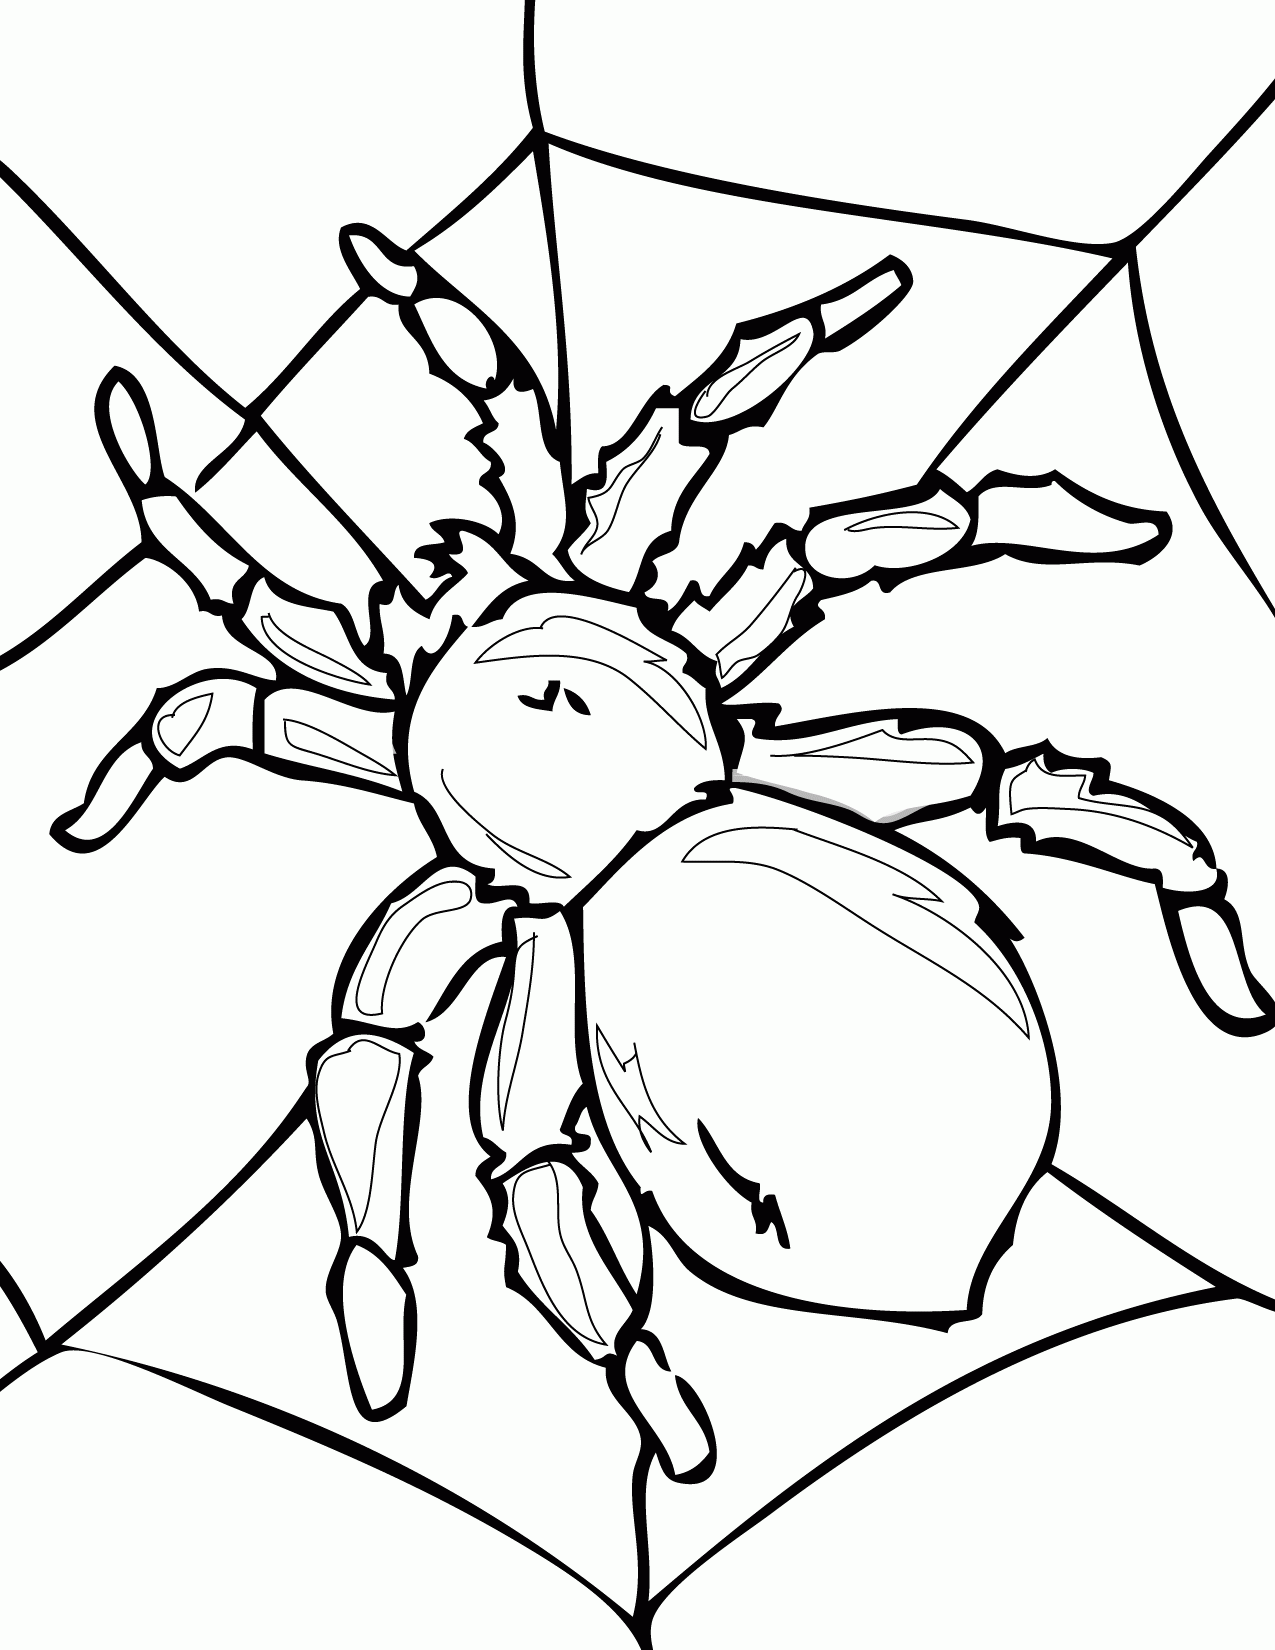 Spider Coloring Pages Printable - Coloring Home